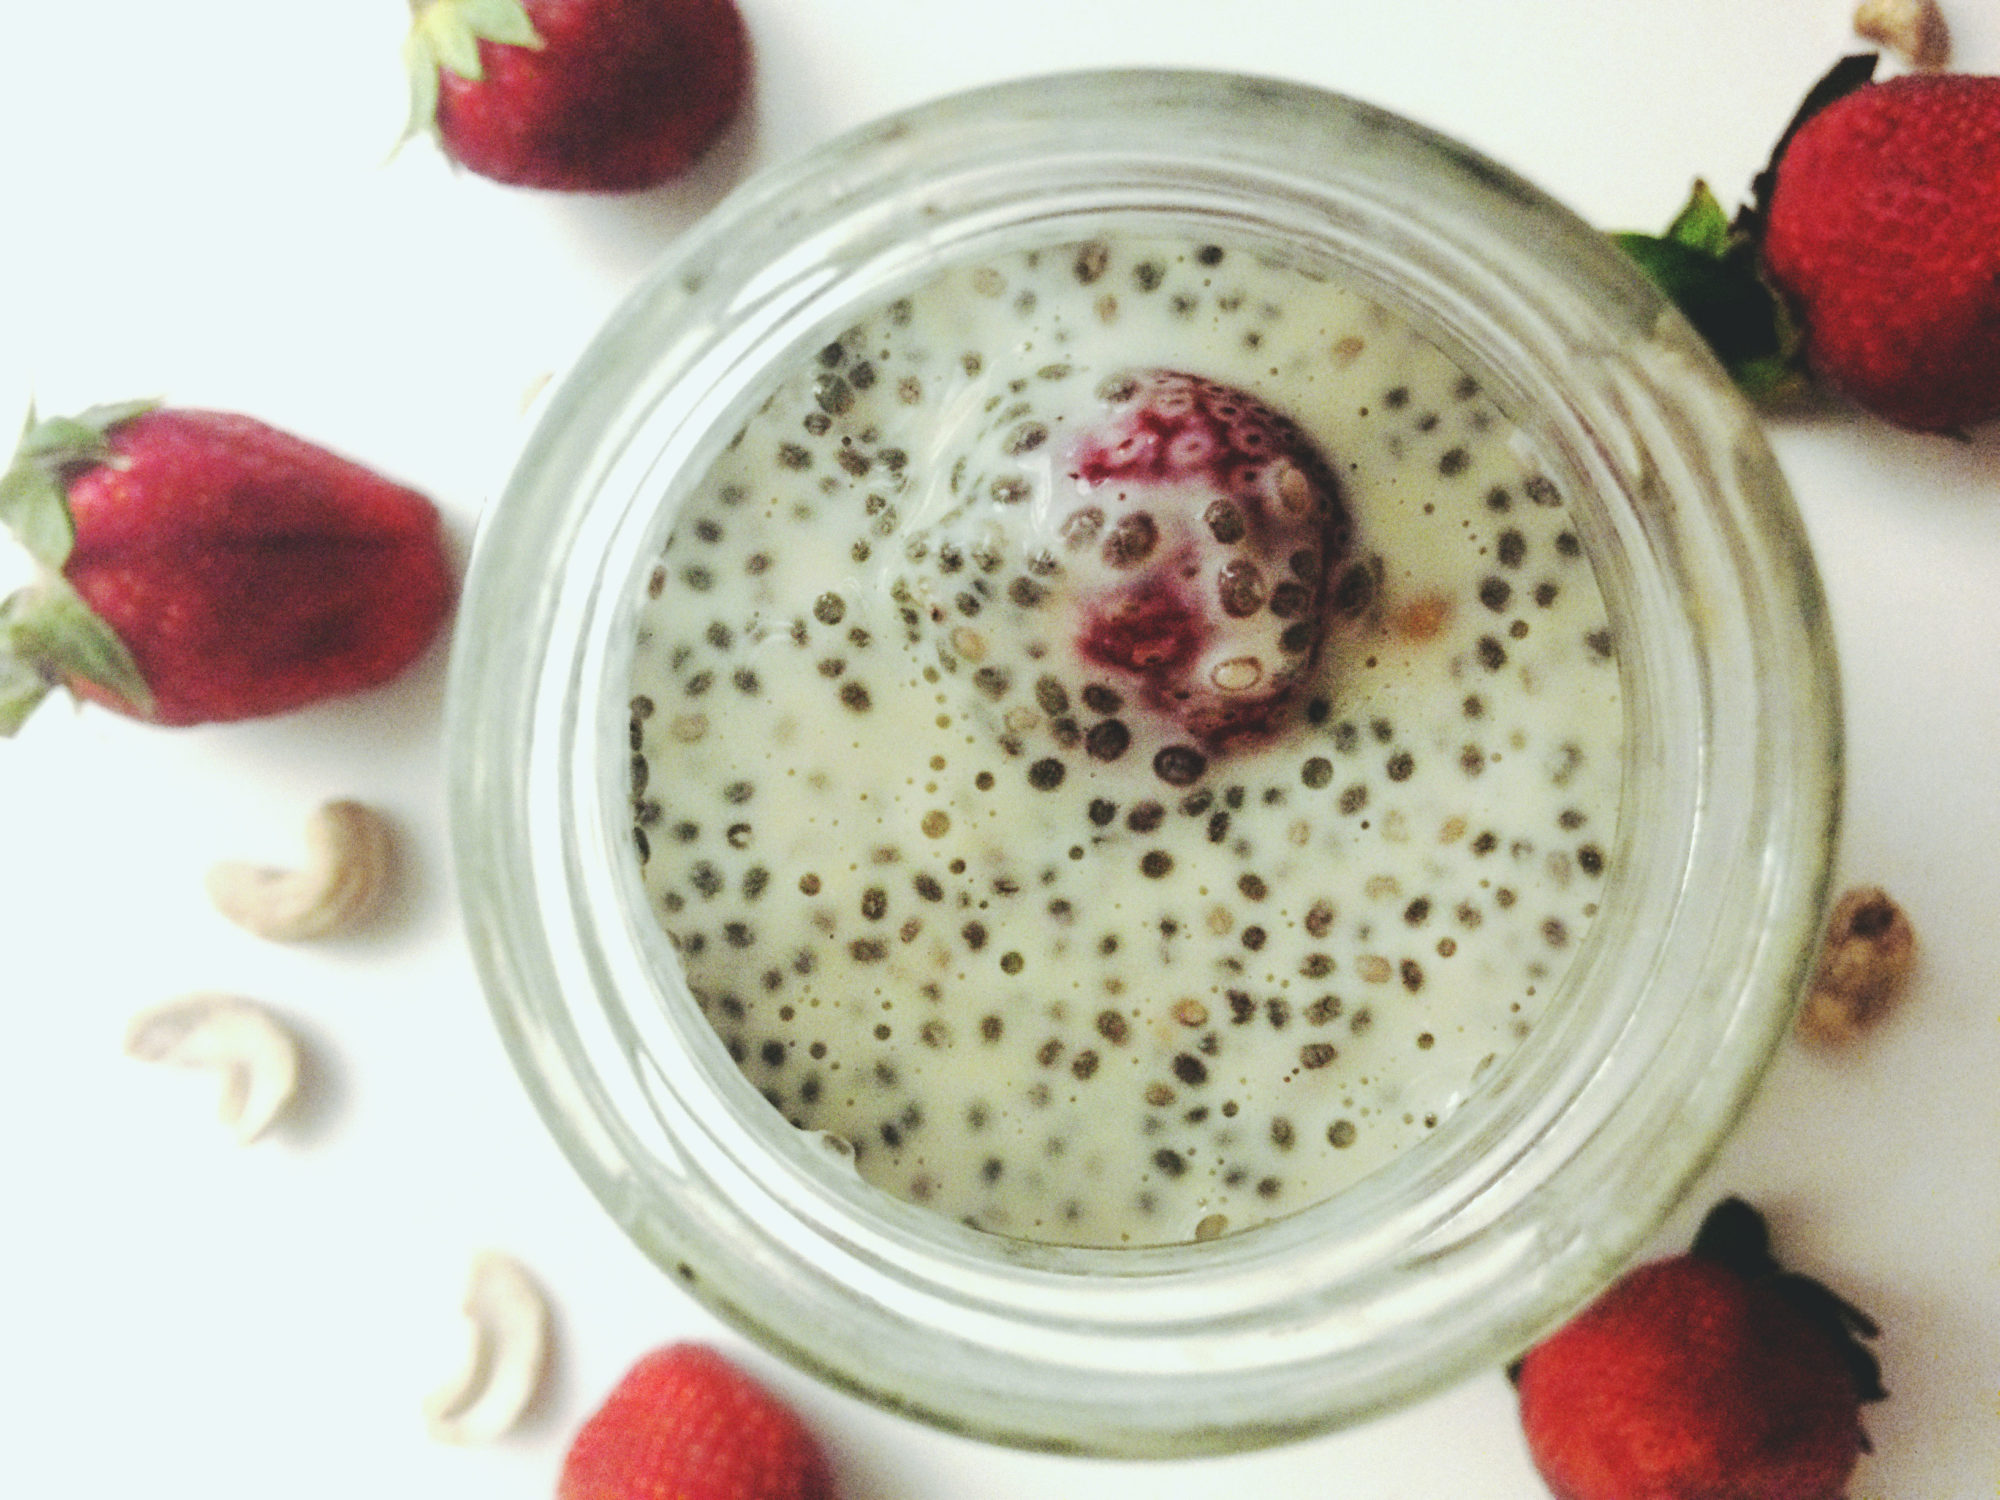 Healthy Strawberries & Cream Chia Seed Pudding